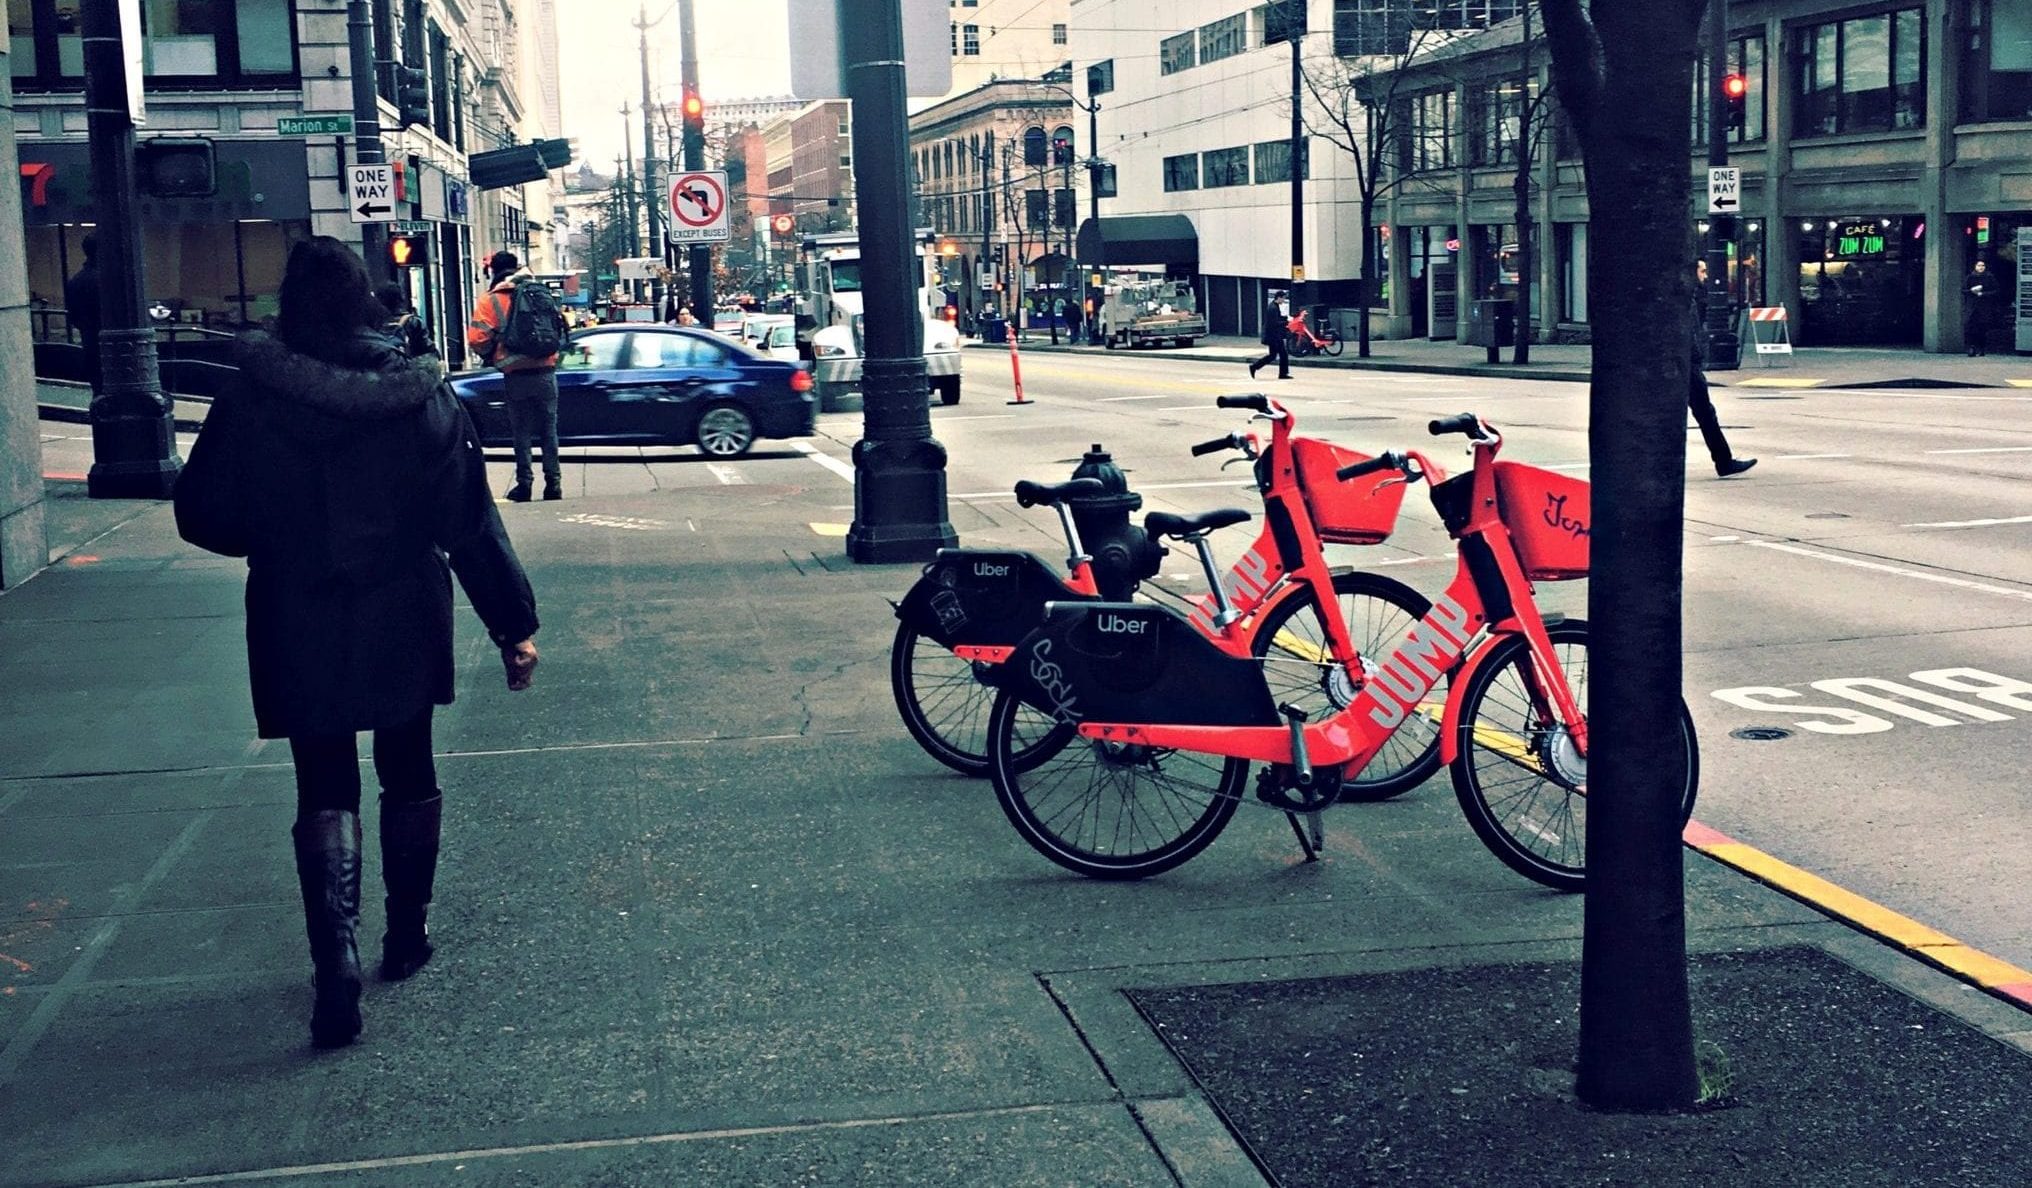 Parked ride share bikes in Downtown Seattle.